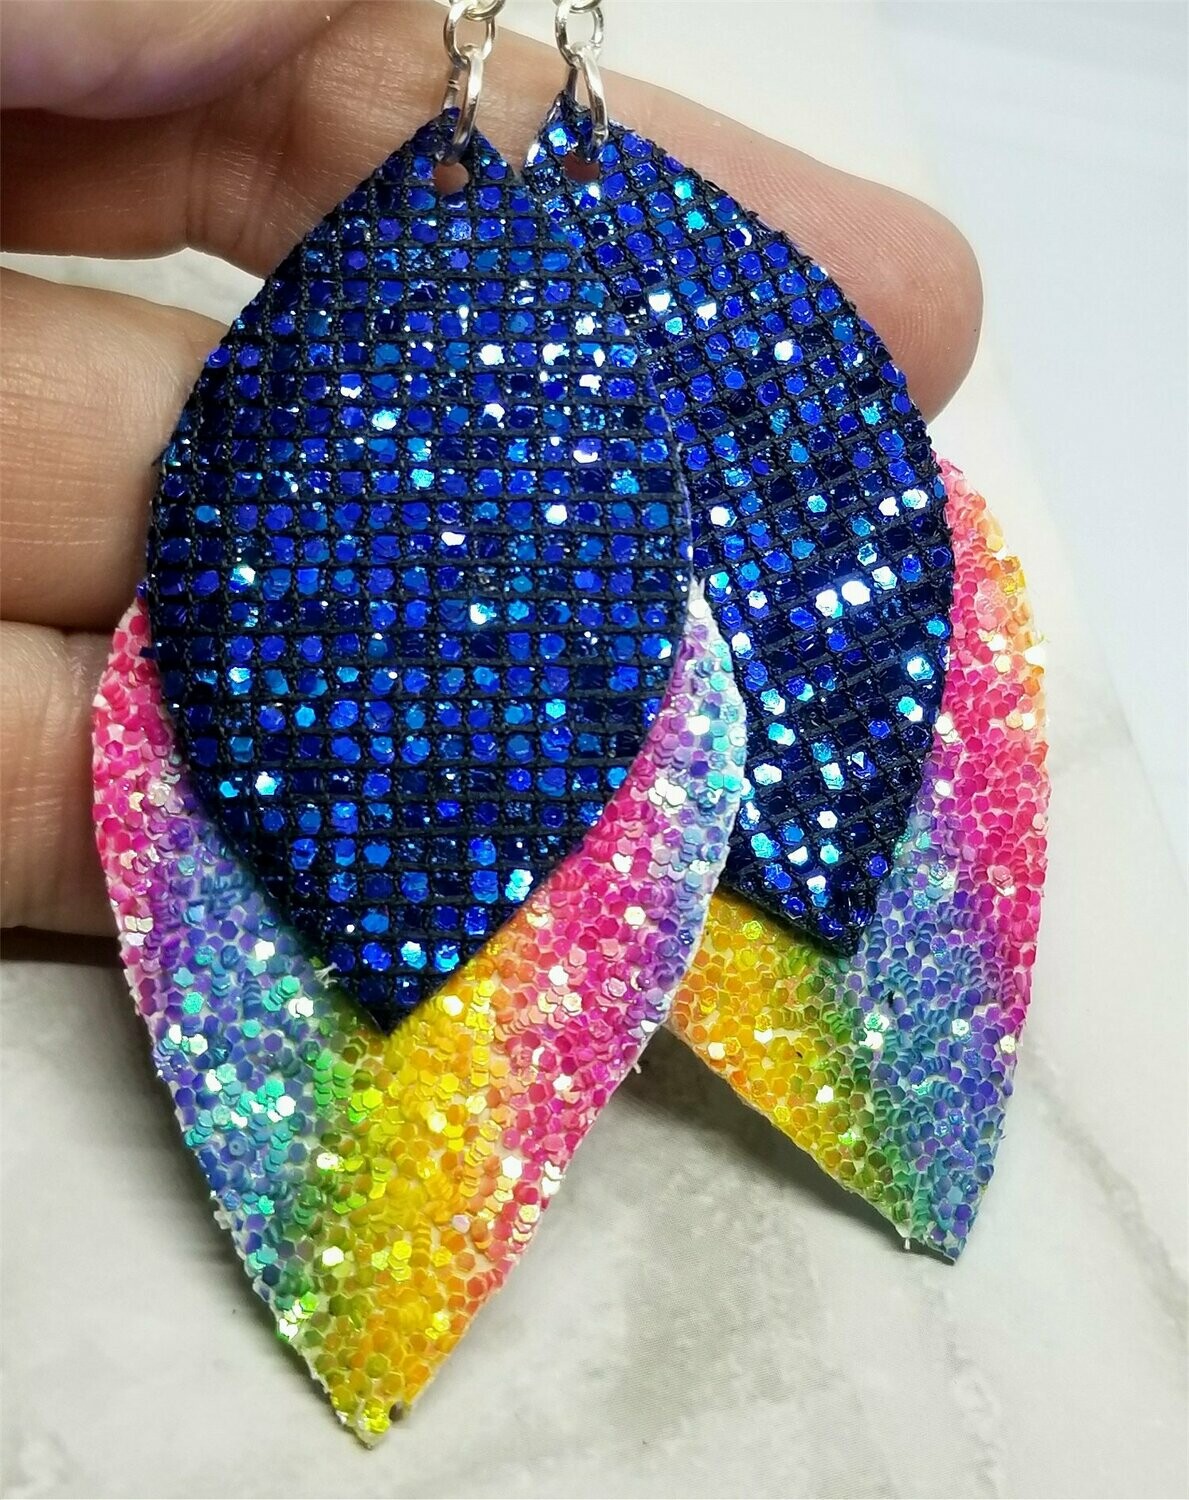 Deep Blue Glitter Faux Leather Over Rainbow Colored Glitter Faux Leather Earrings